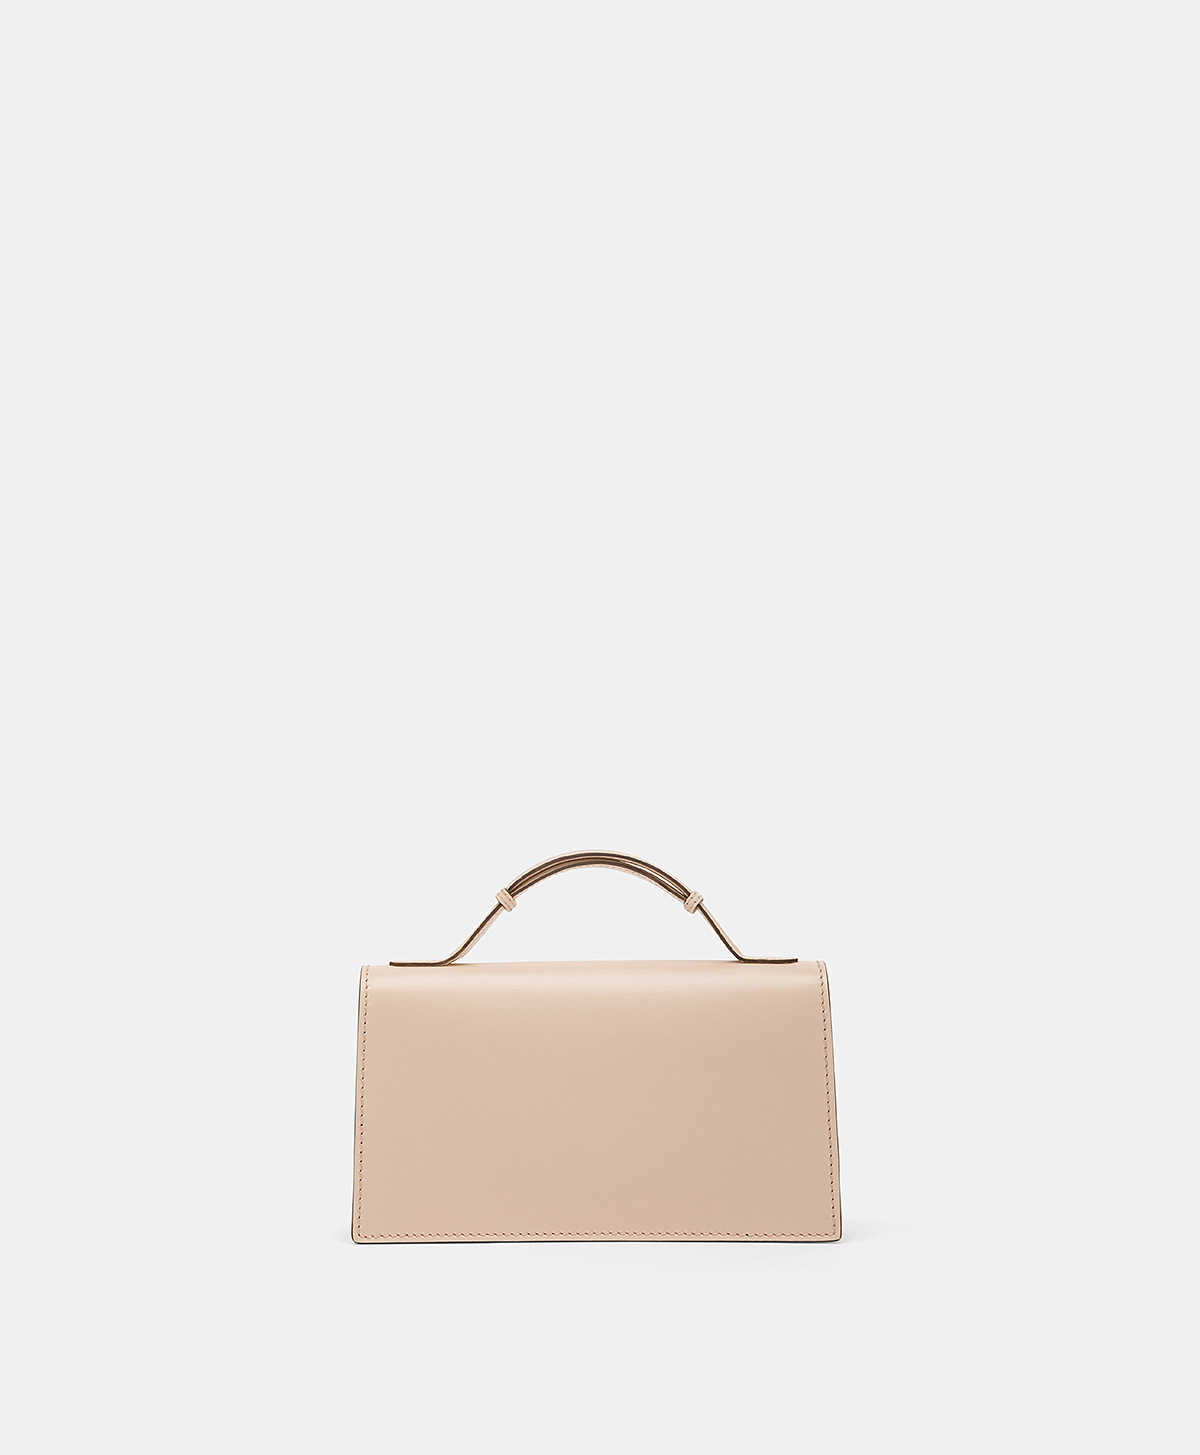 SOPHIE BAG IN NAPPA LEATHER - POWDER PINK - Momonì